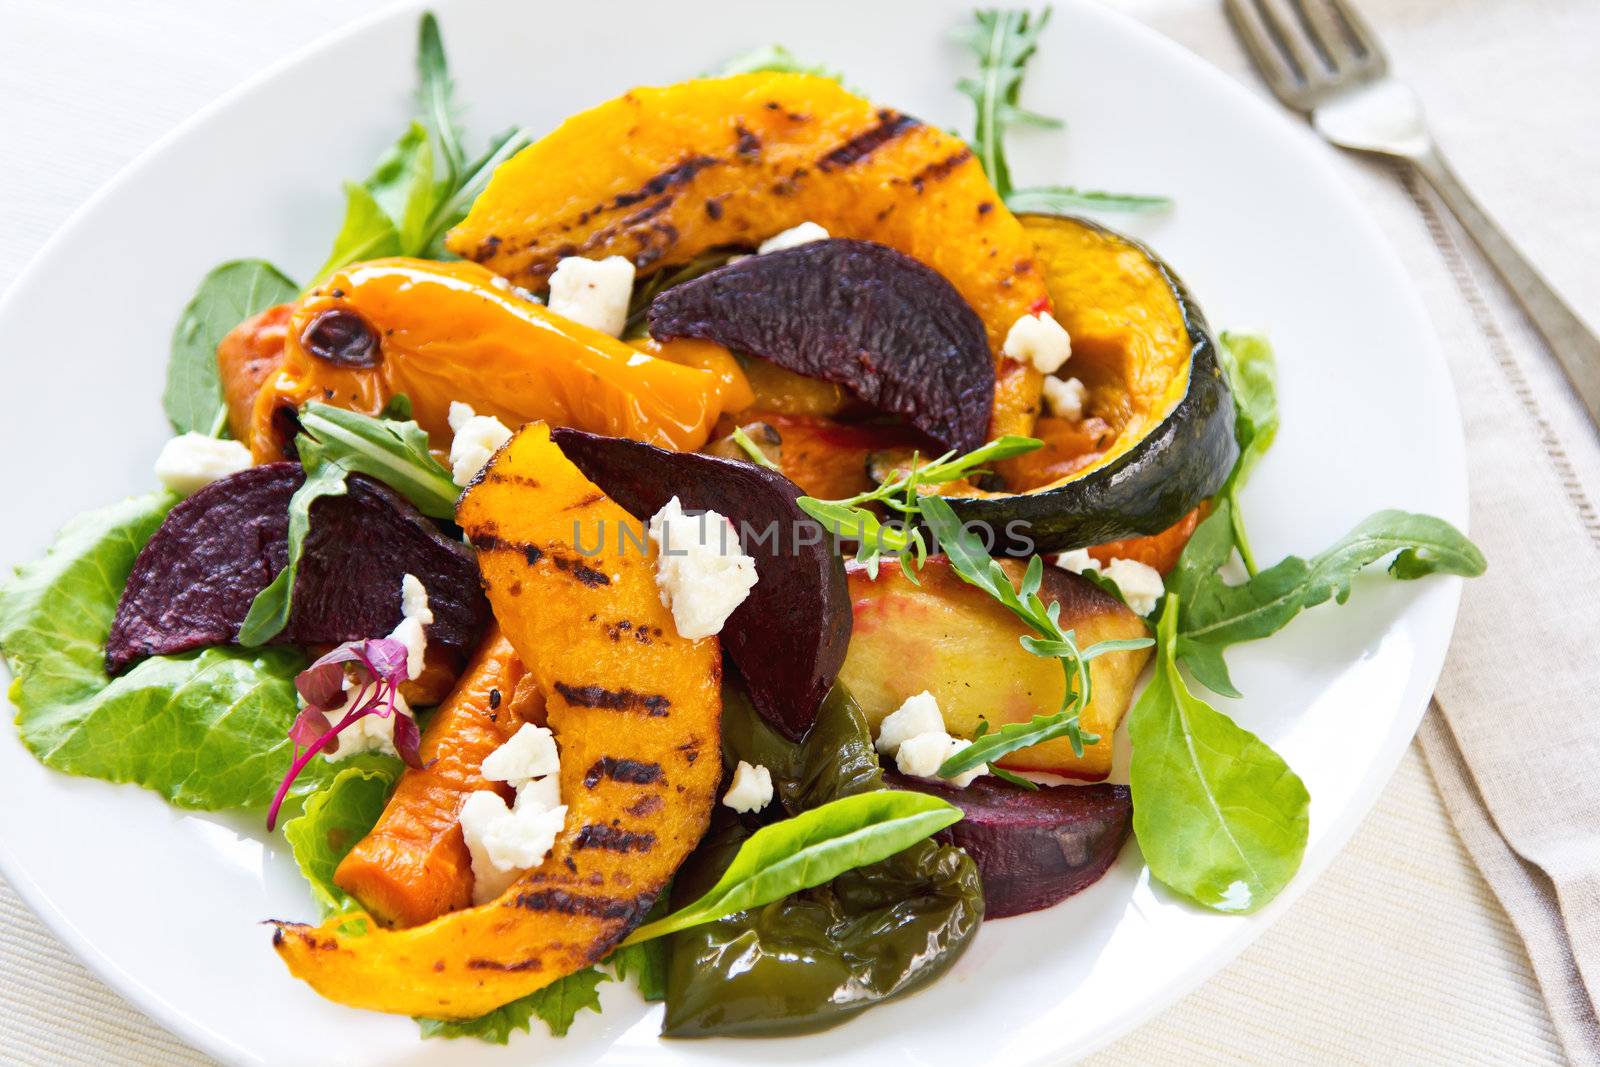 Grilled varieties of vegetables with Feta cheese  and rocket salad